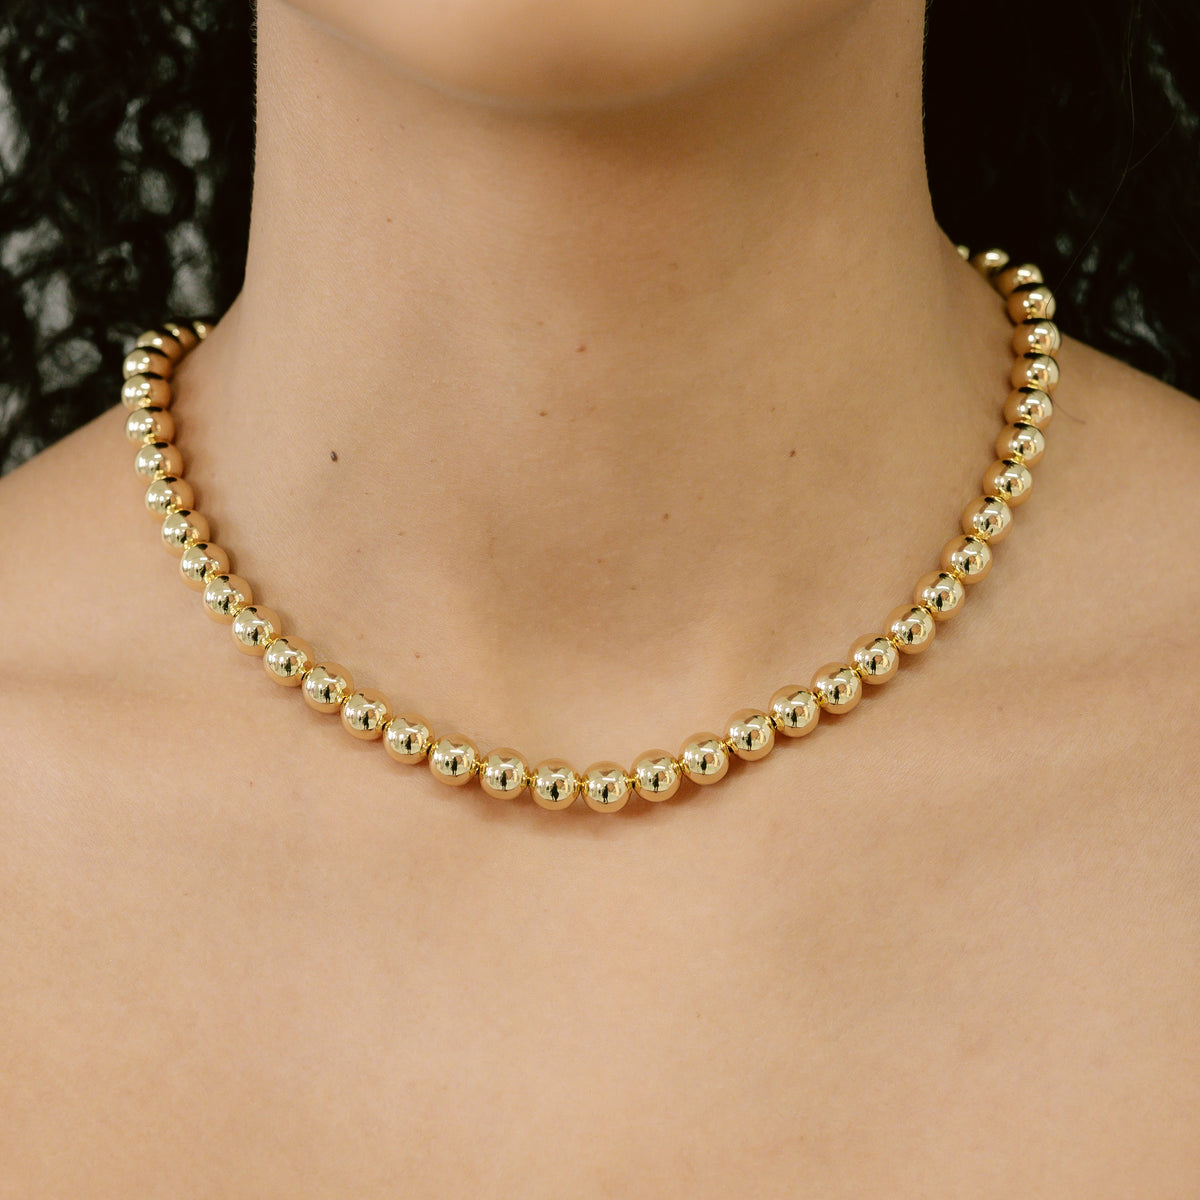 8mm Gold Beads Chain